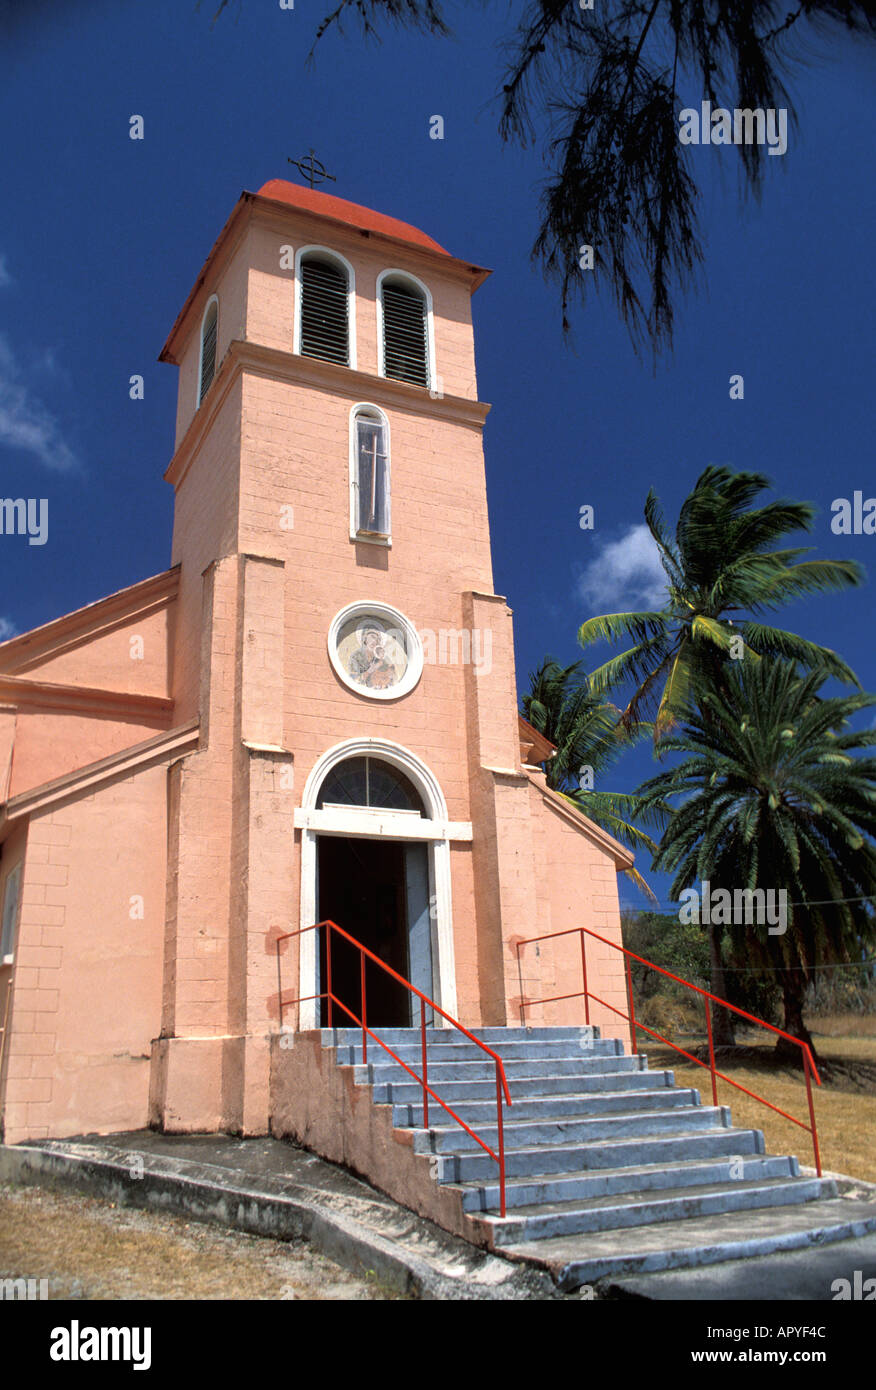 Antigua Colorful Pink Church against Blue Sky Our Lady of Perpetual Help Catholic Church Stock Photo